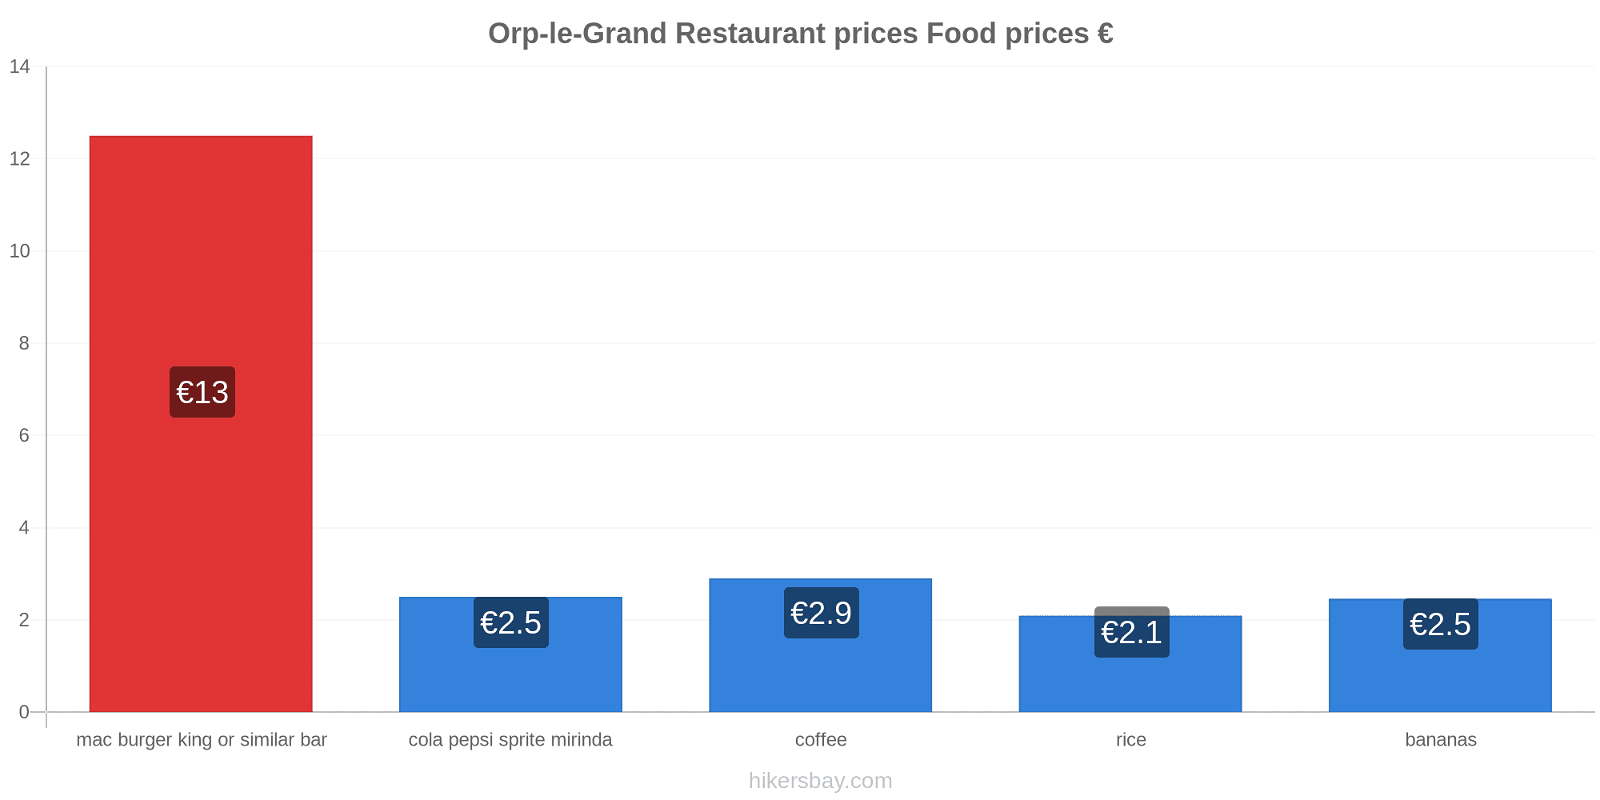 Orp-le-Grand price changes hikersbay.com